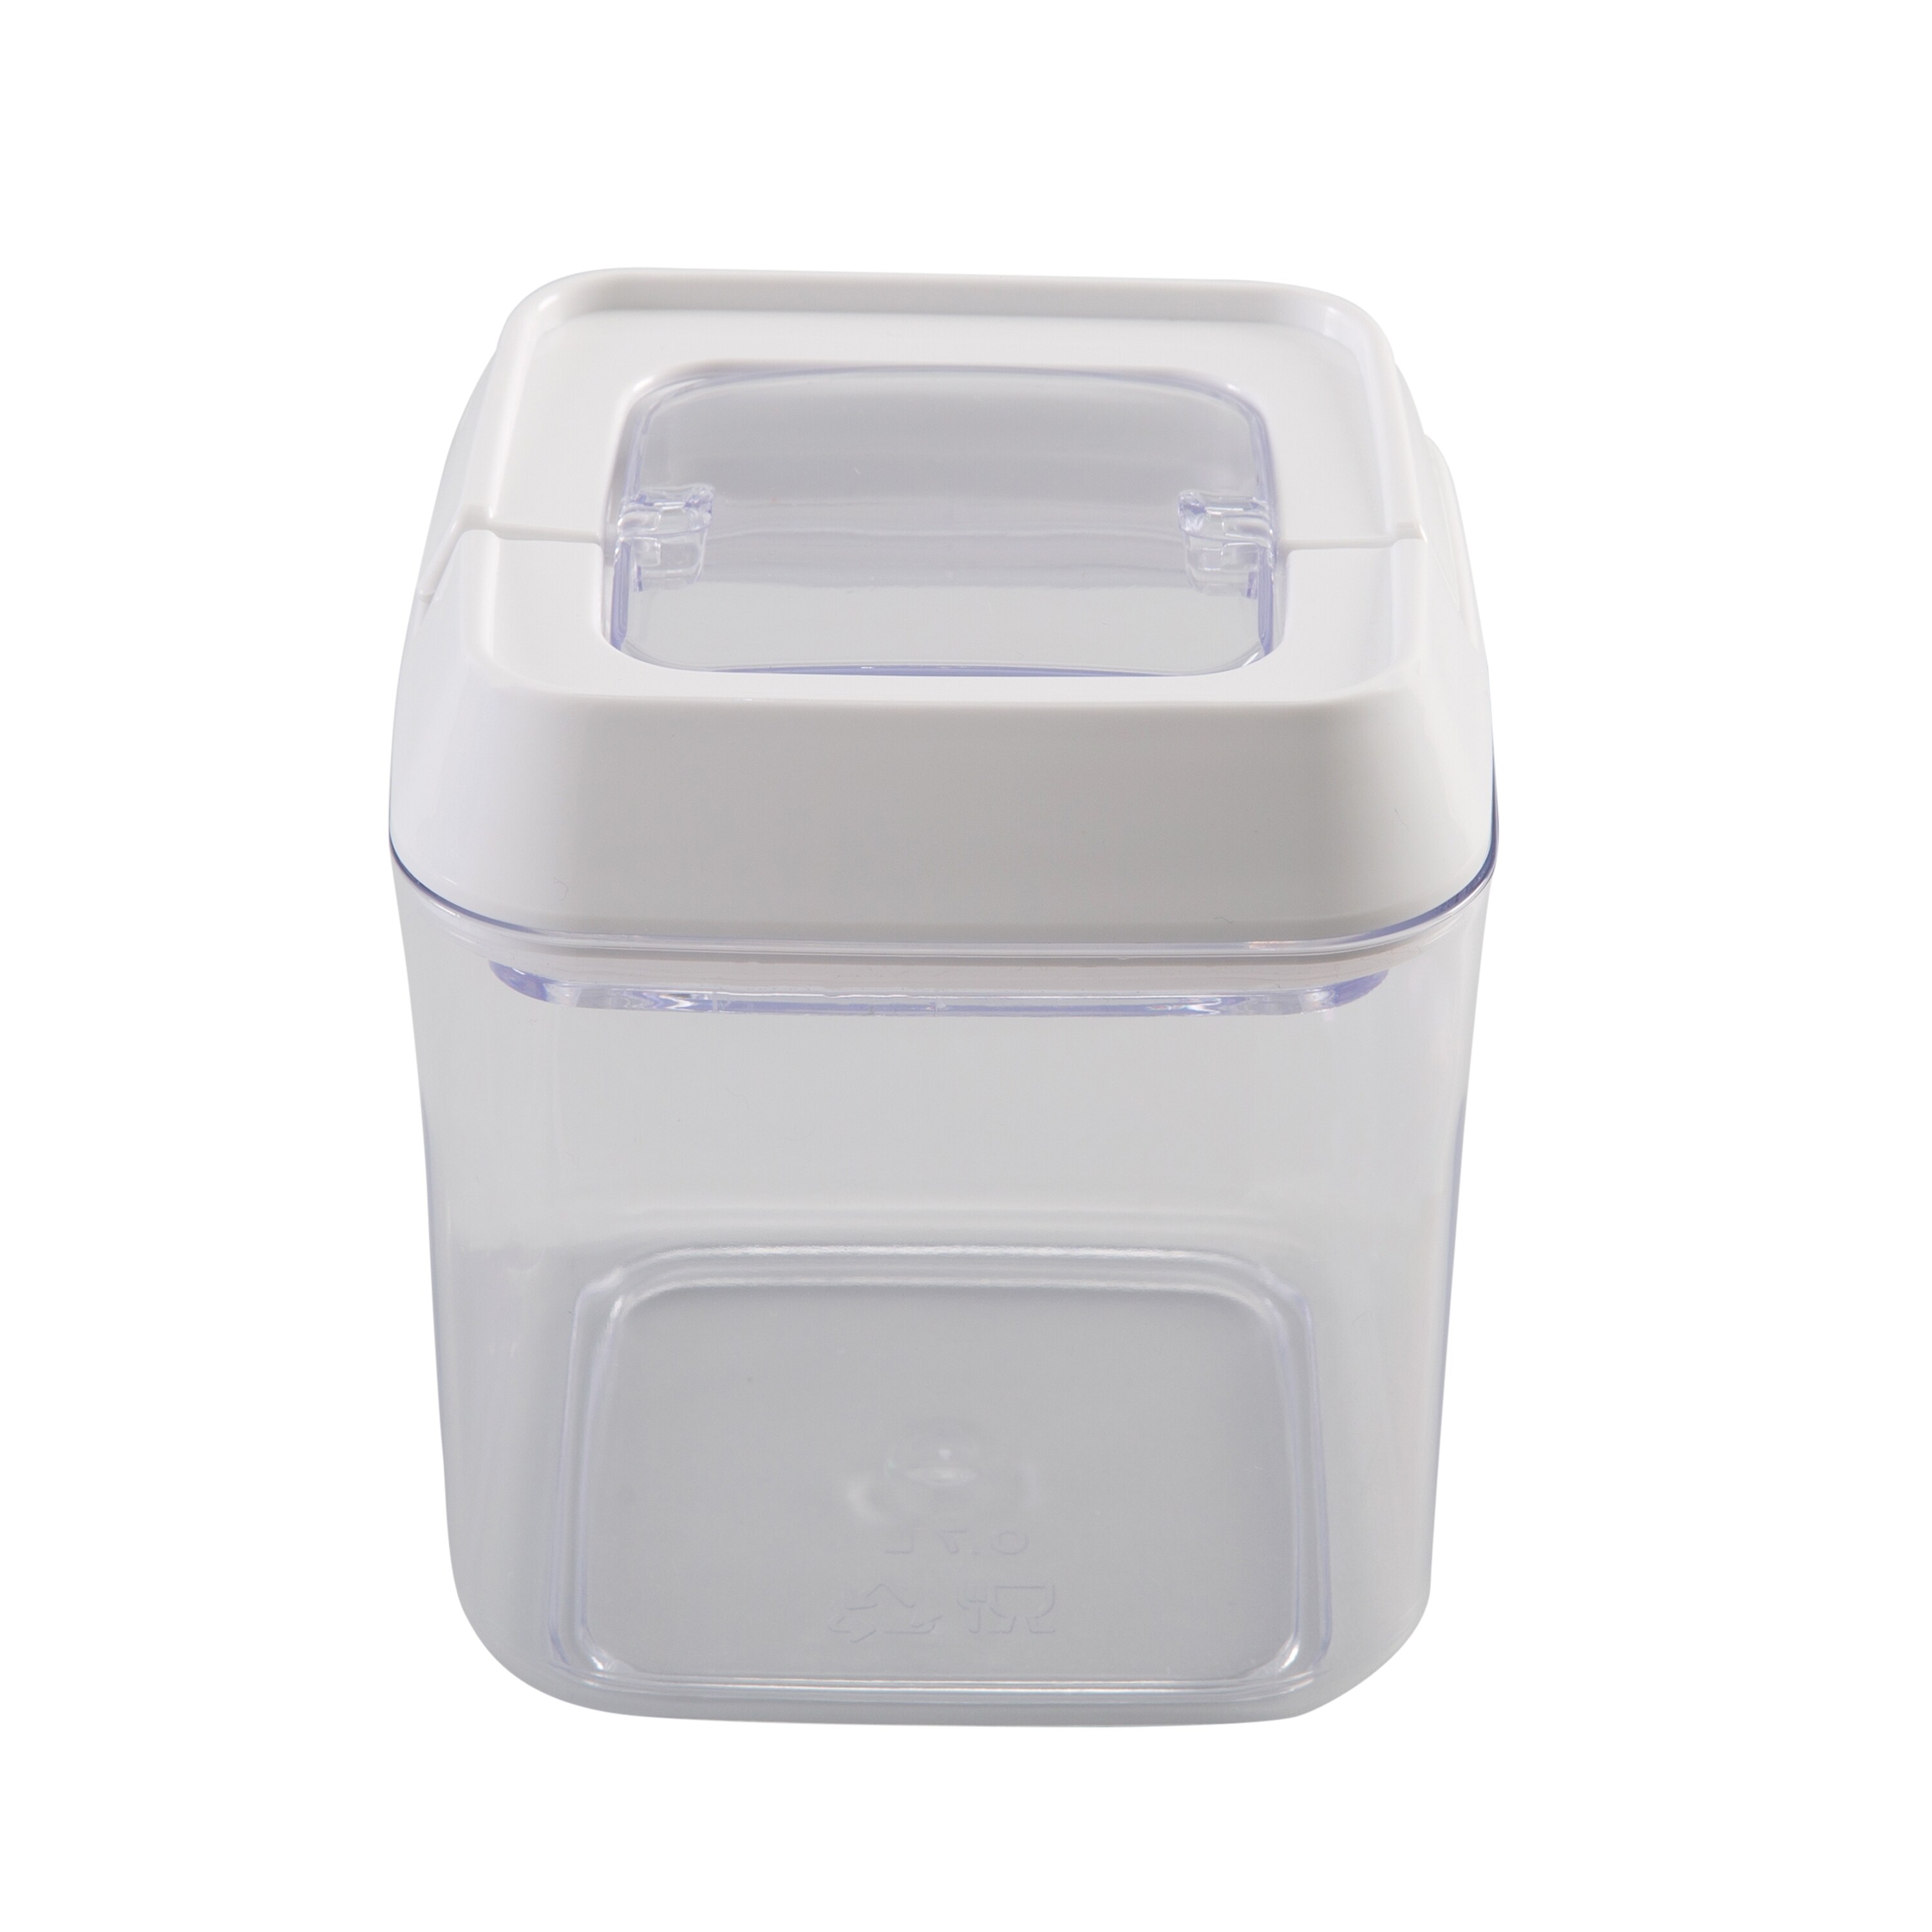 https://ak1.ostkcdn.com/images/products/is/images/direct/57639d7247bcd55bd082460f248fecfe591d8968/Kitchen-Details-.7L-Airtight-Stackable-Container.jpg